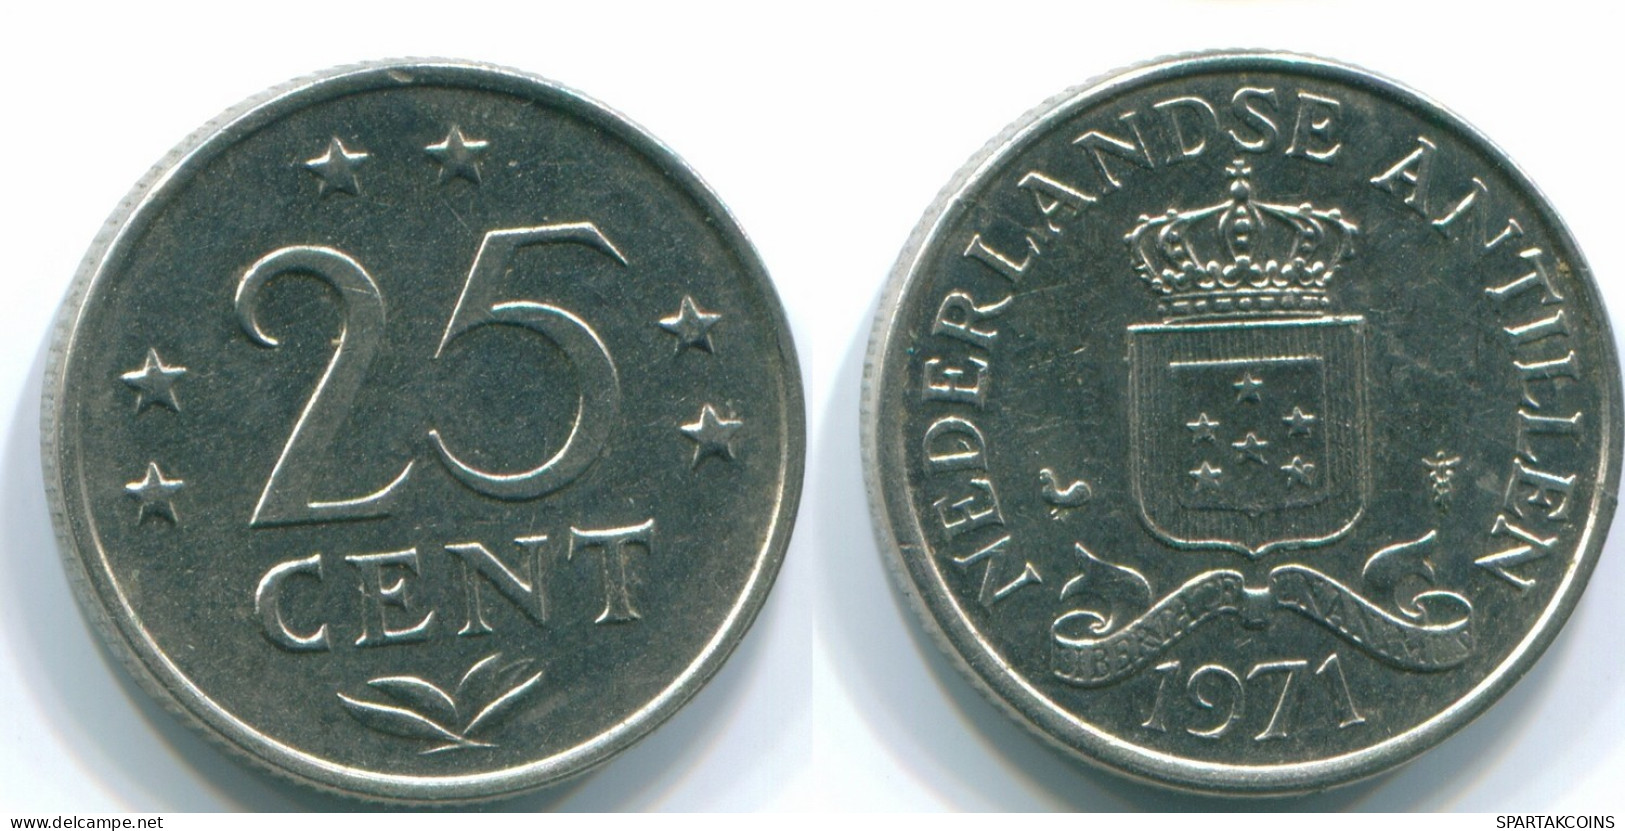 25 CENTS 1971 NETHERLANDS ANTILLES Nickel Colonial Coin #S11556.U.A - Netherlands Antilles